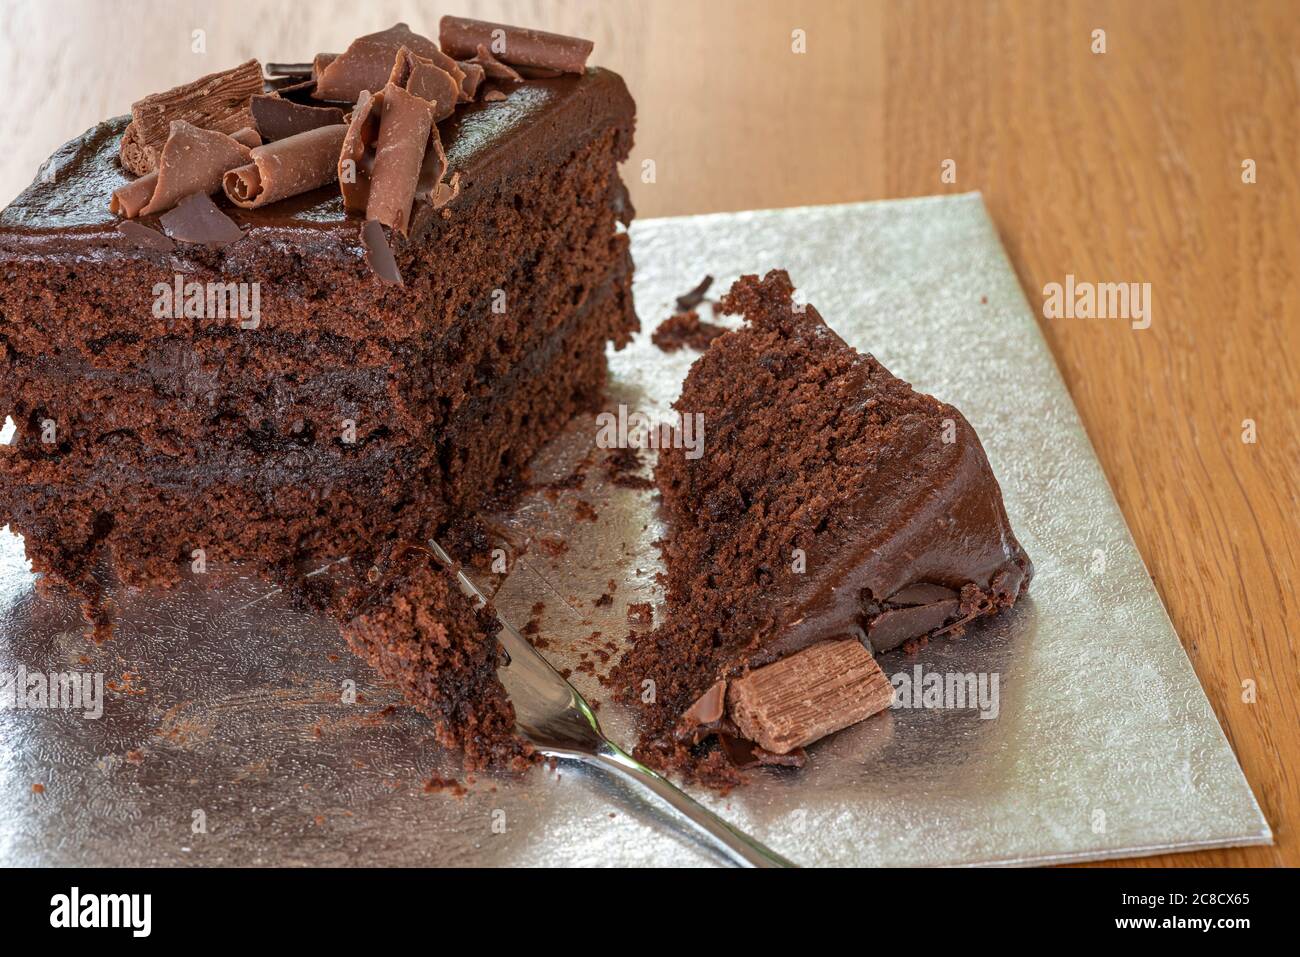 Half eaten chocolate cake, with fork and silver cake board. Stock Photo